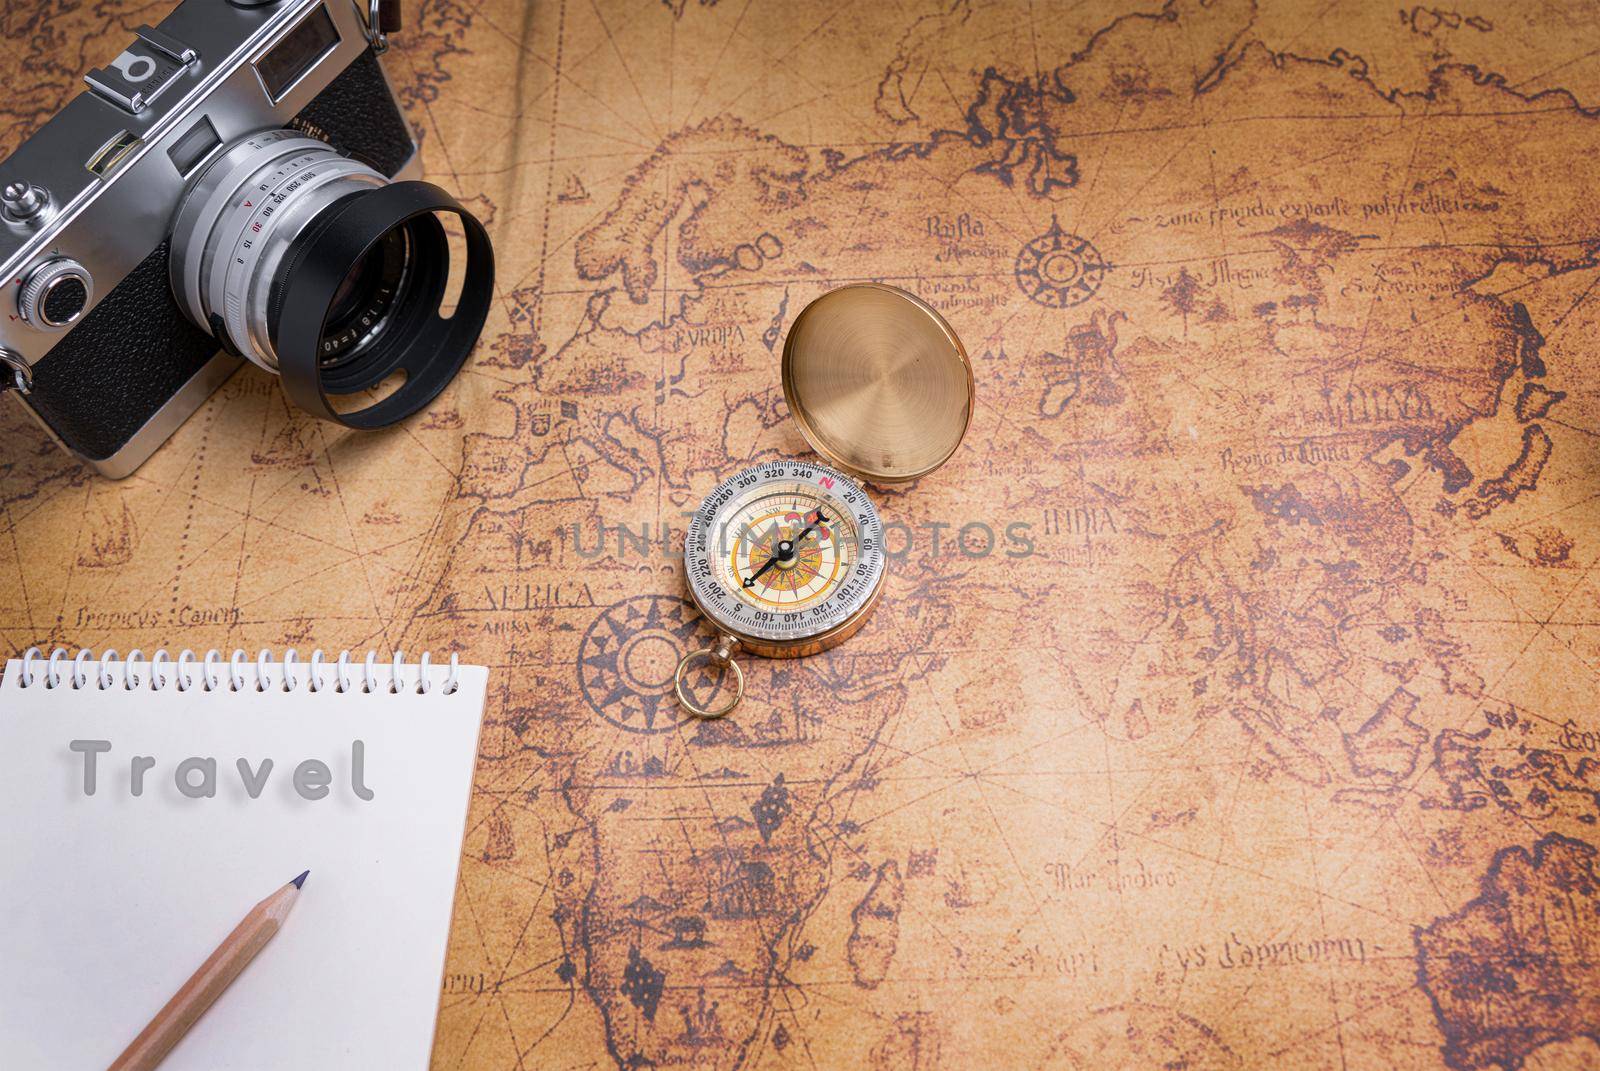 Vintage Compass and camera on map for travel planning by Buttus_casso